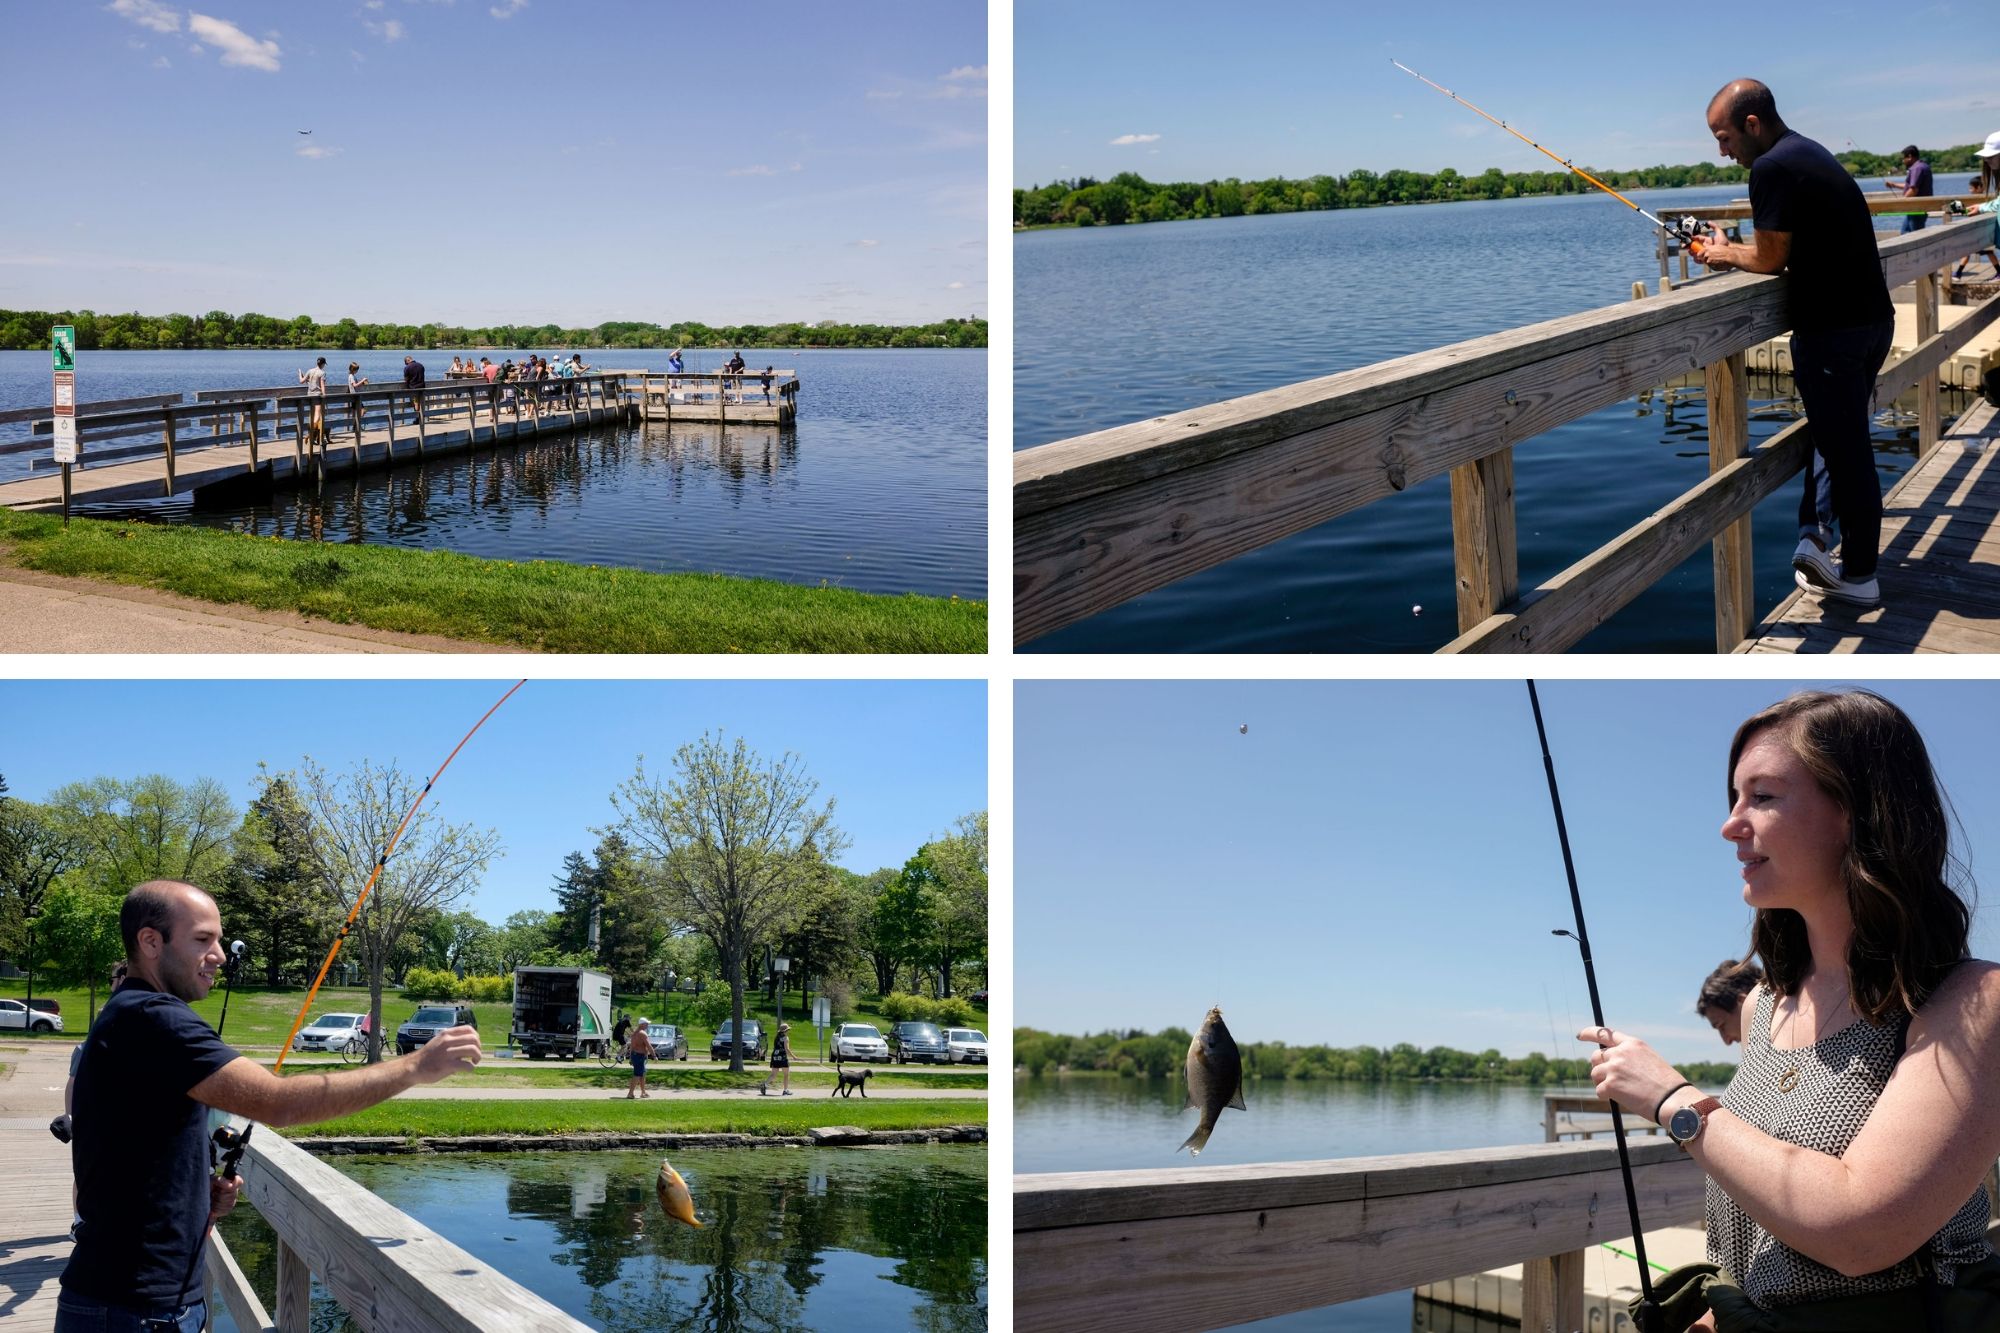 collage: people fishing on a pier, and Alyssa and Michael with their caught fish